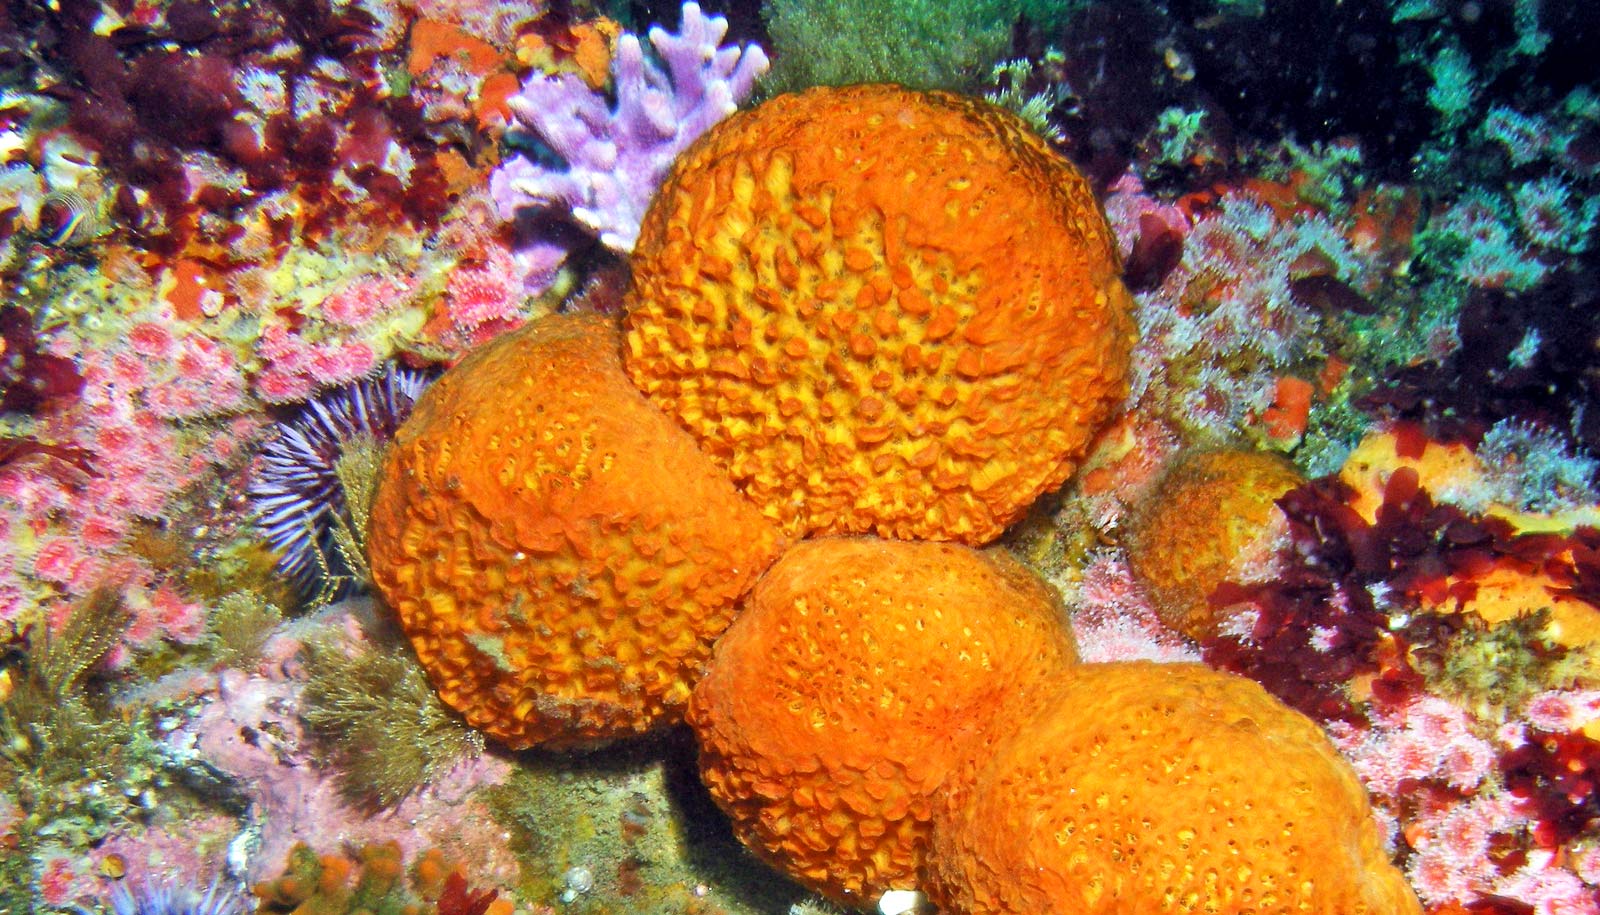 how many millimetre can sea sponges moves